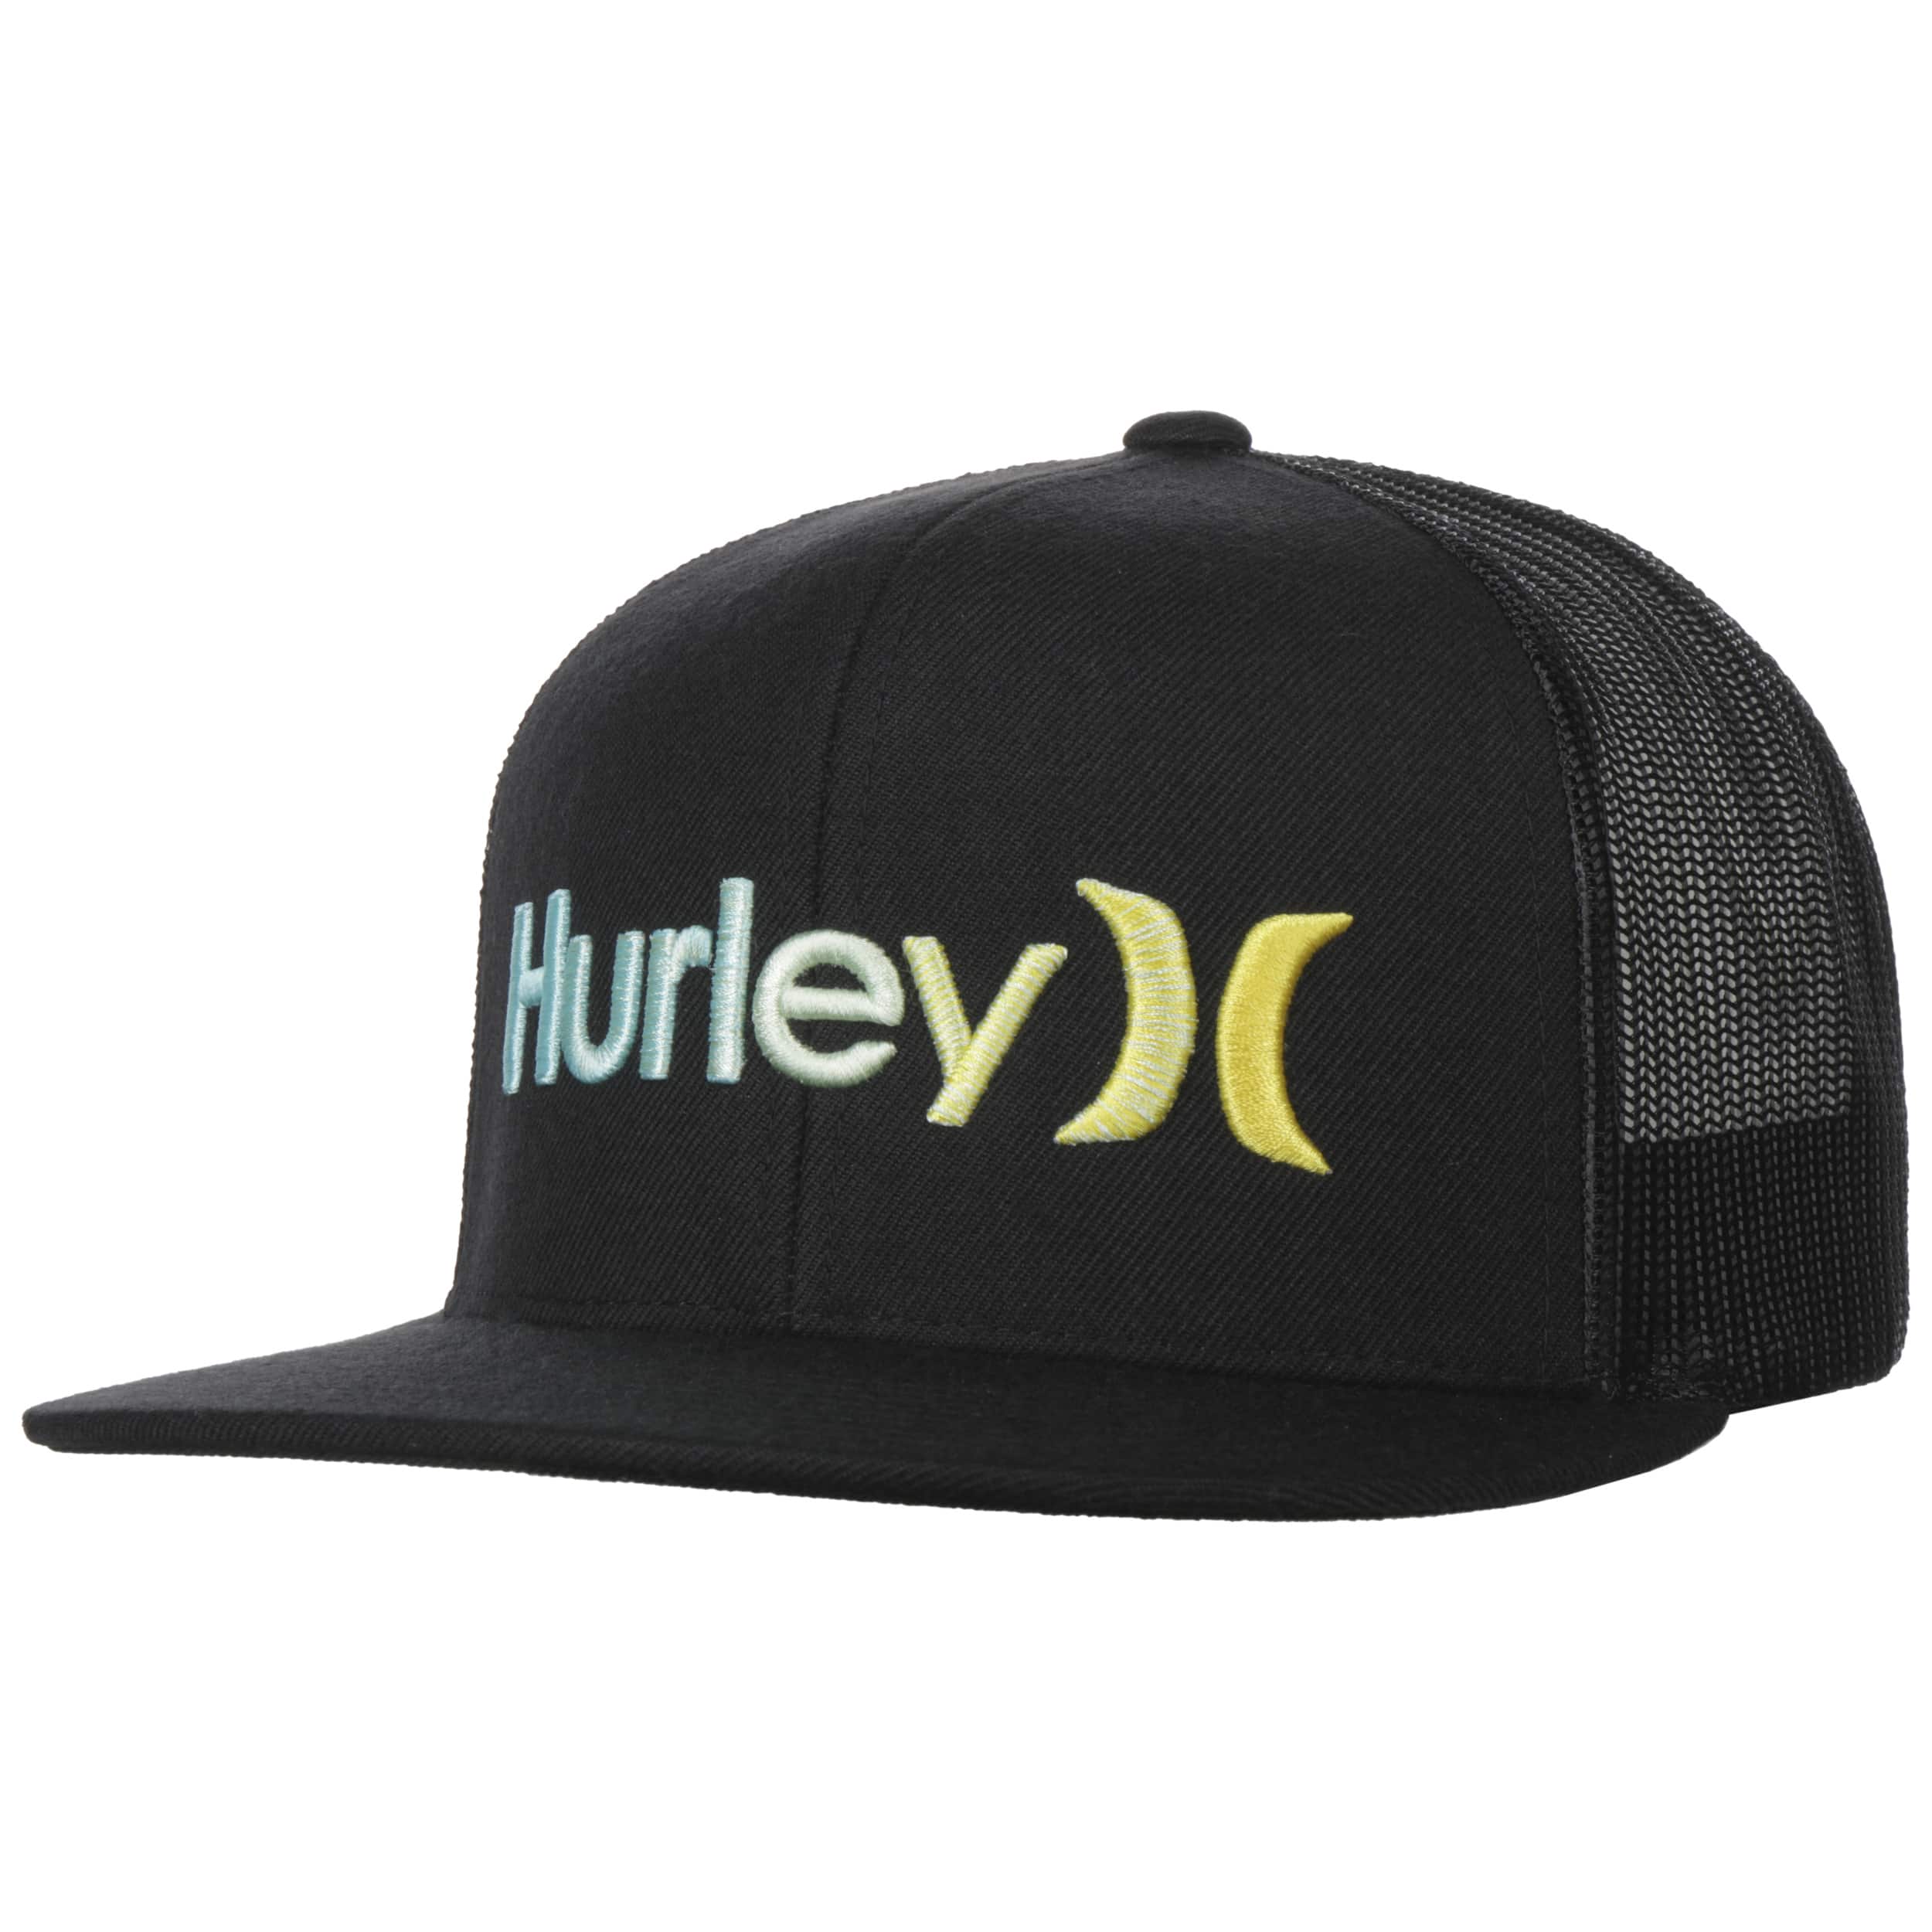 One Only Gradient Trucker Cap By Hurley 35 95